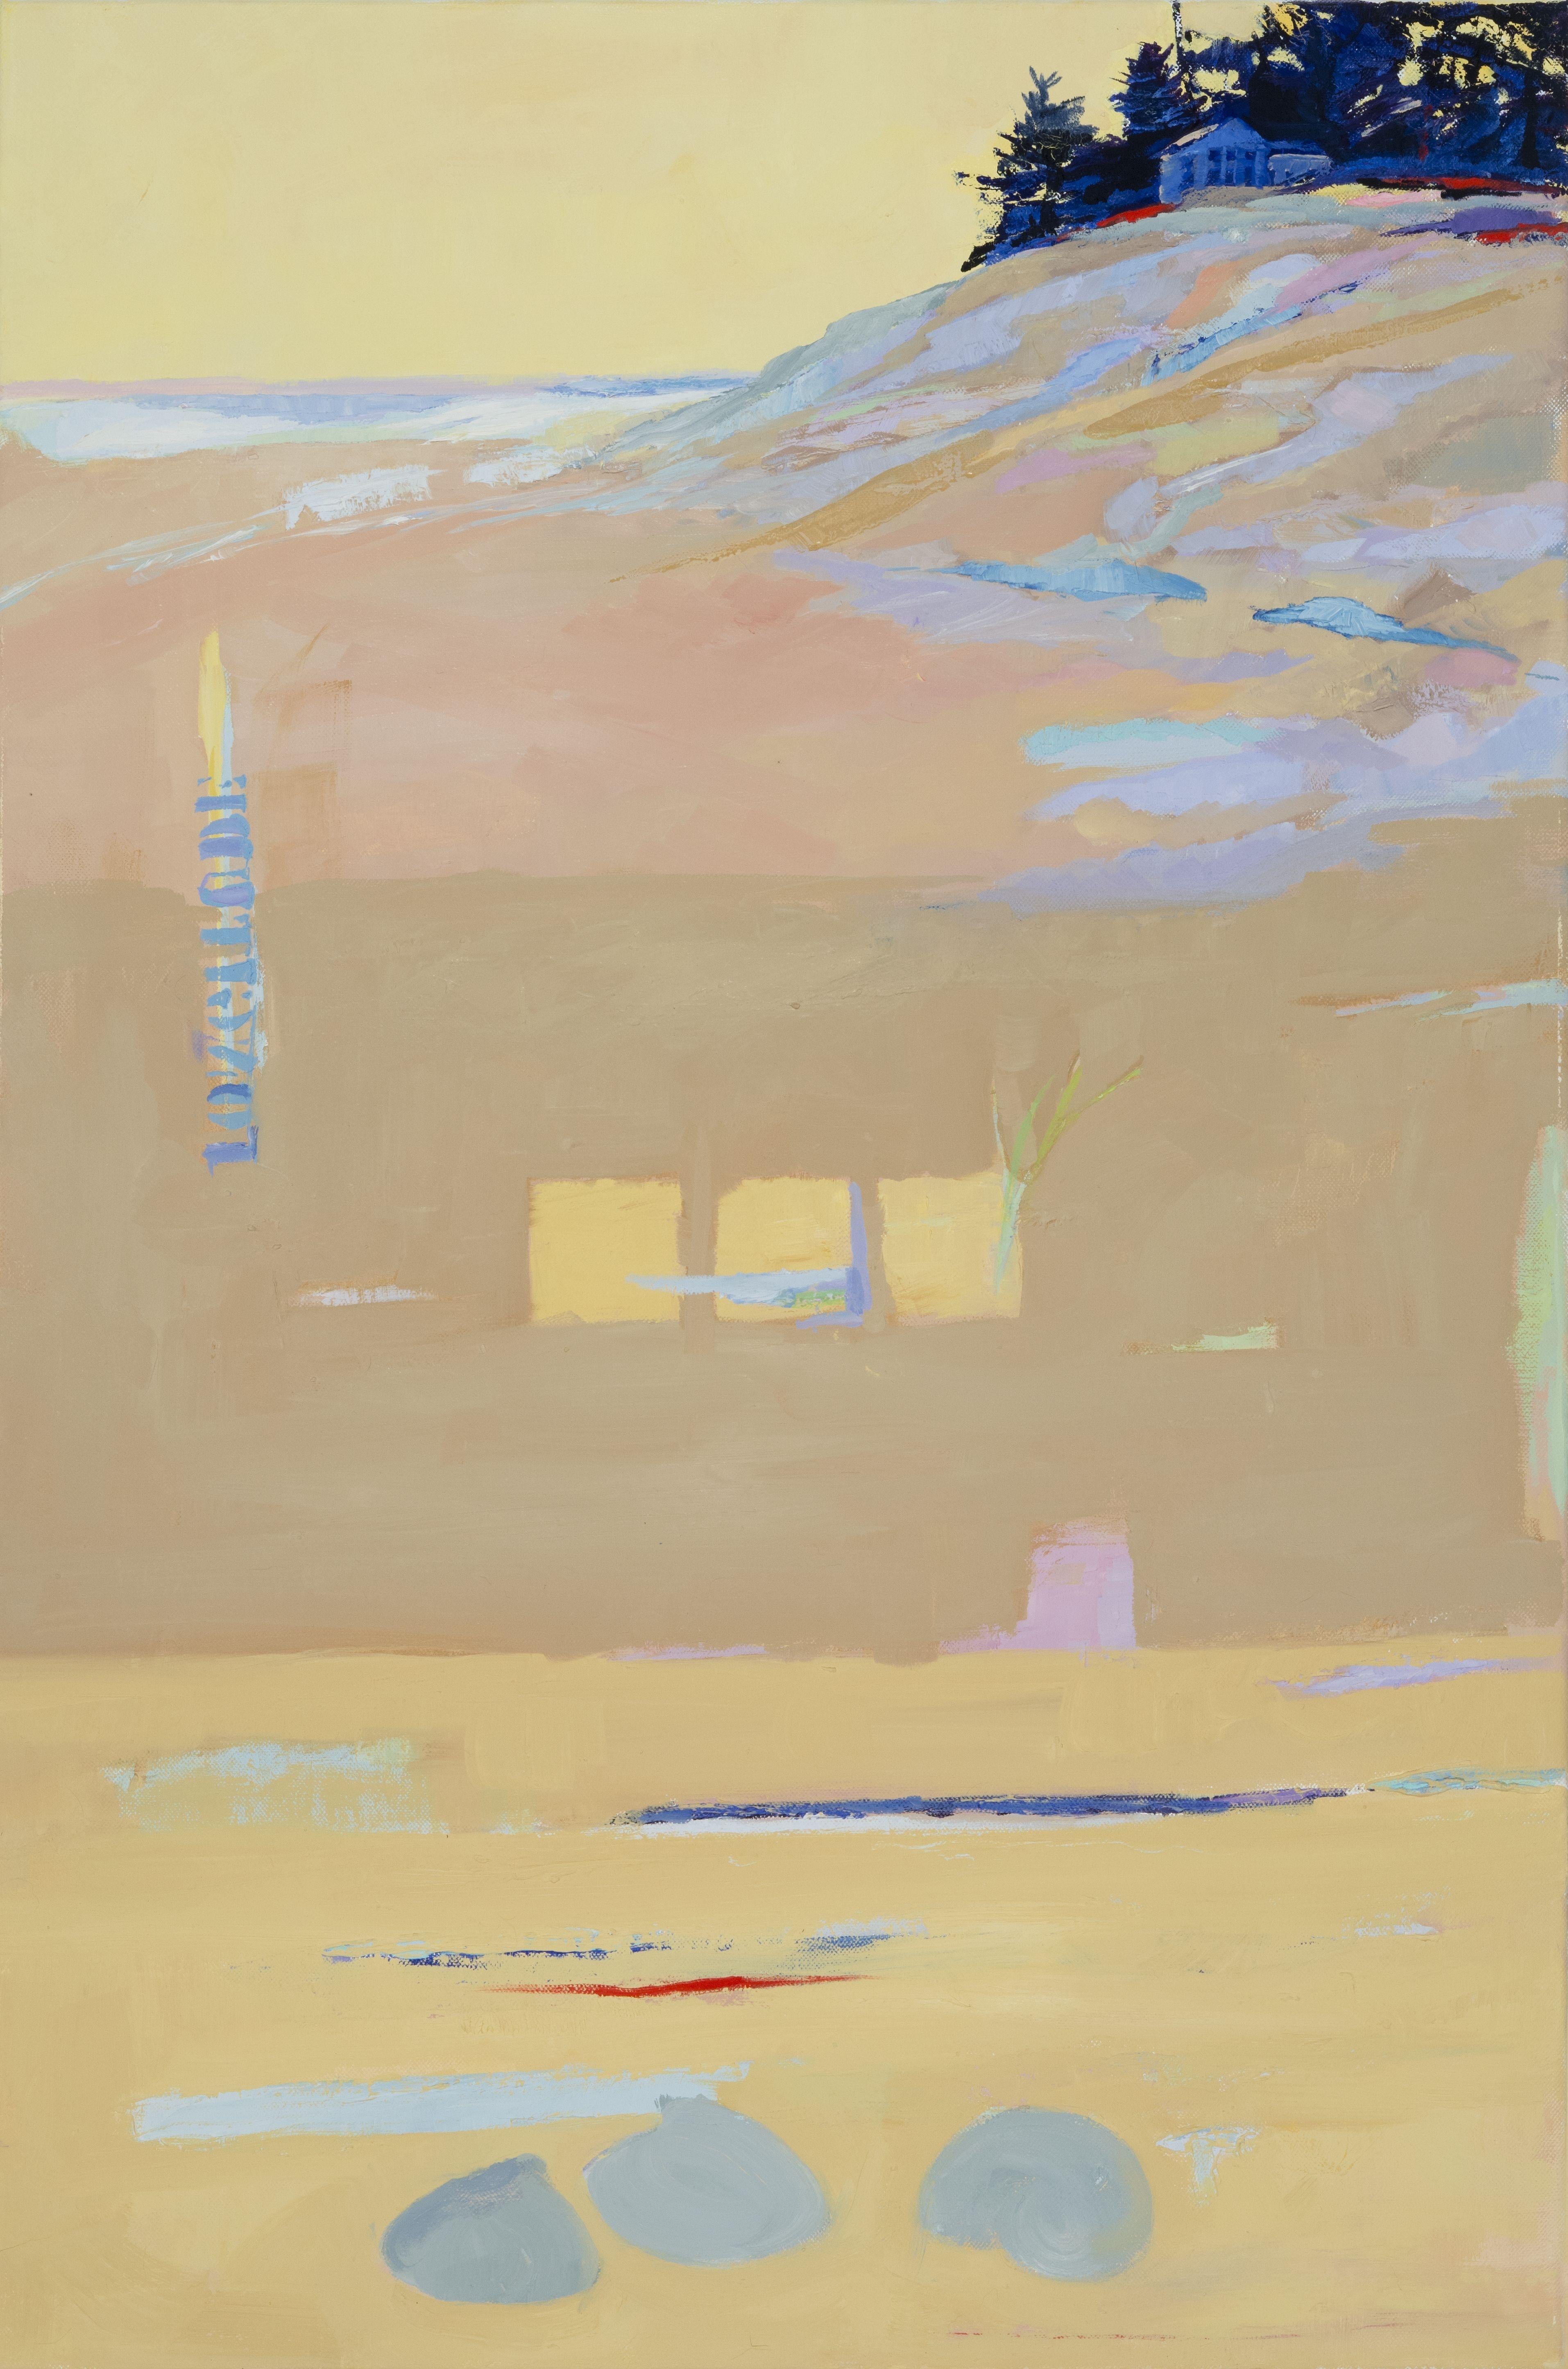 Gayle Fitzpatrick Abstract Painting - Without a Map, Parson's Beach, Painting, Oil on Canvas